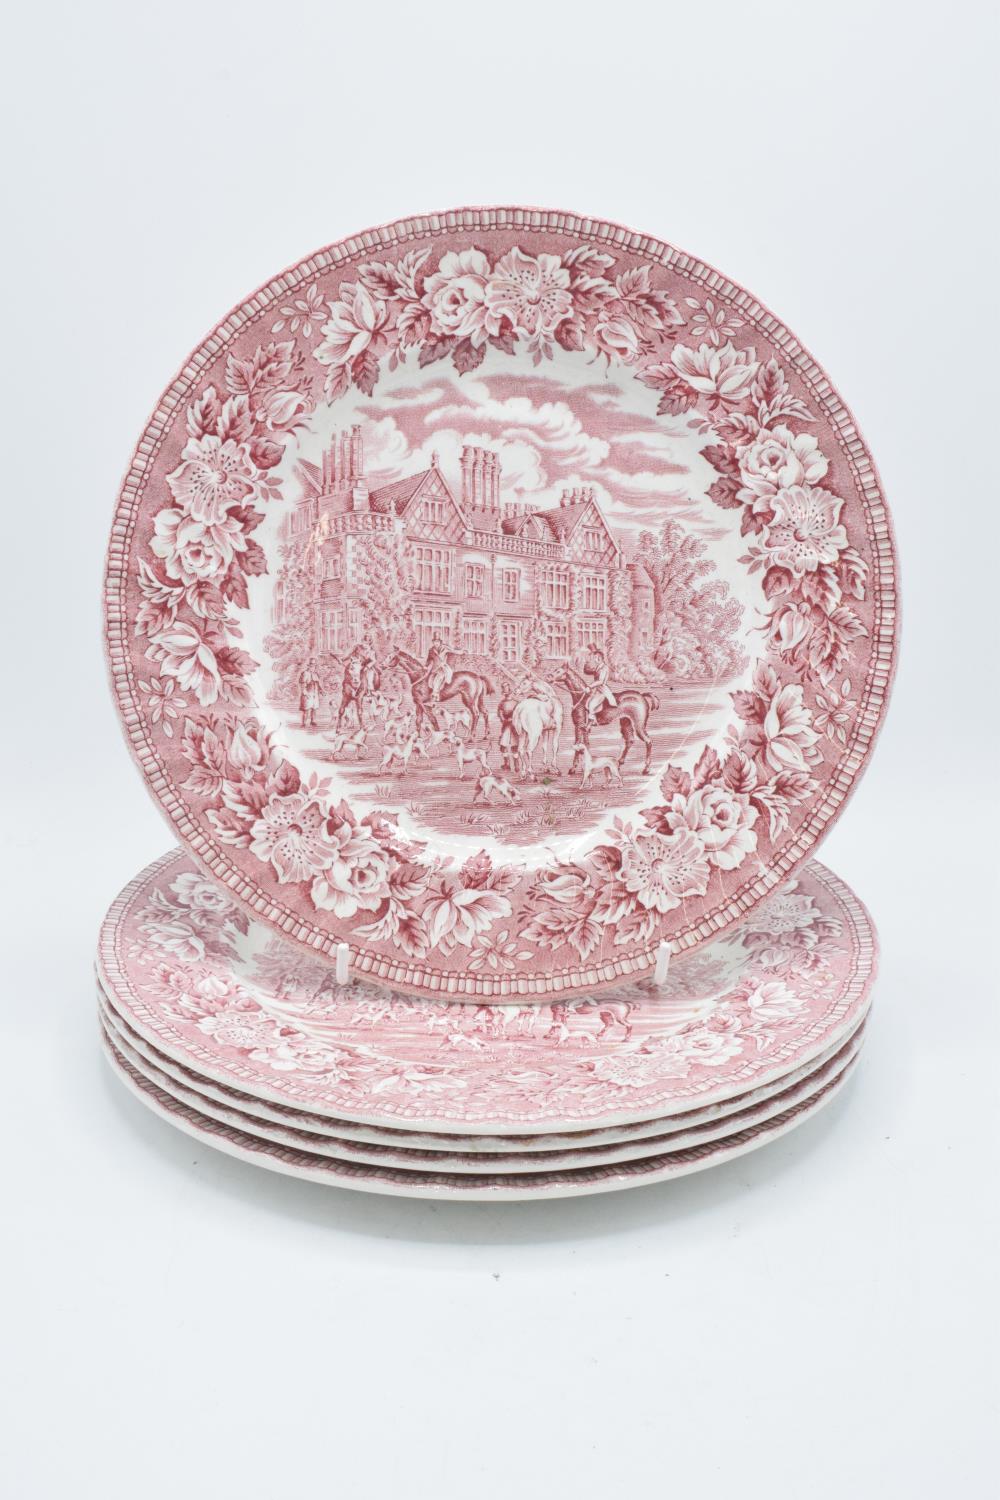 Aynsley and Co Ironstone plates 'England's Heritage', 10 inch diameter (5). In good condition with - Image 4 of 4